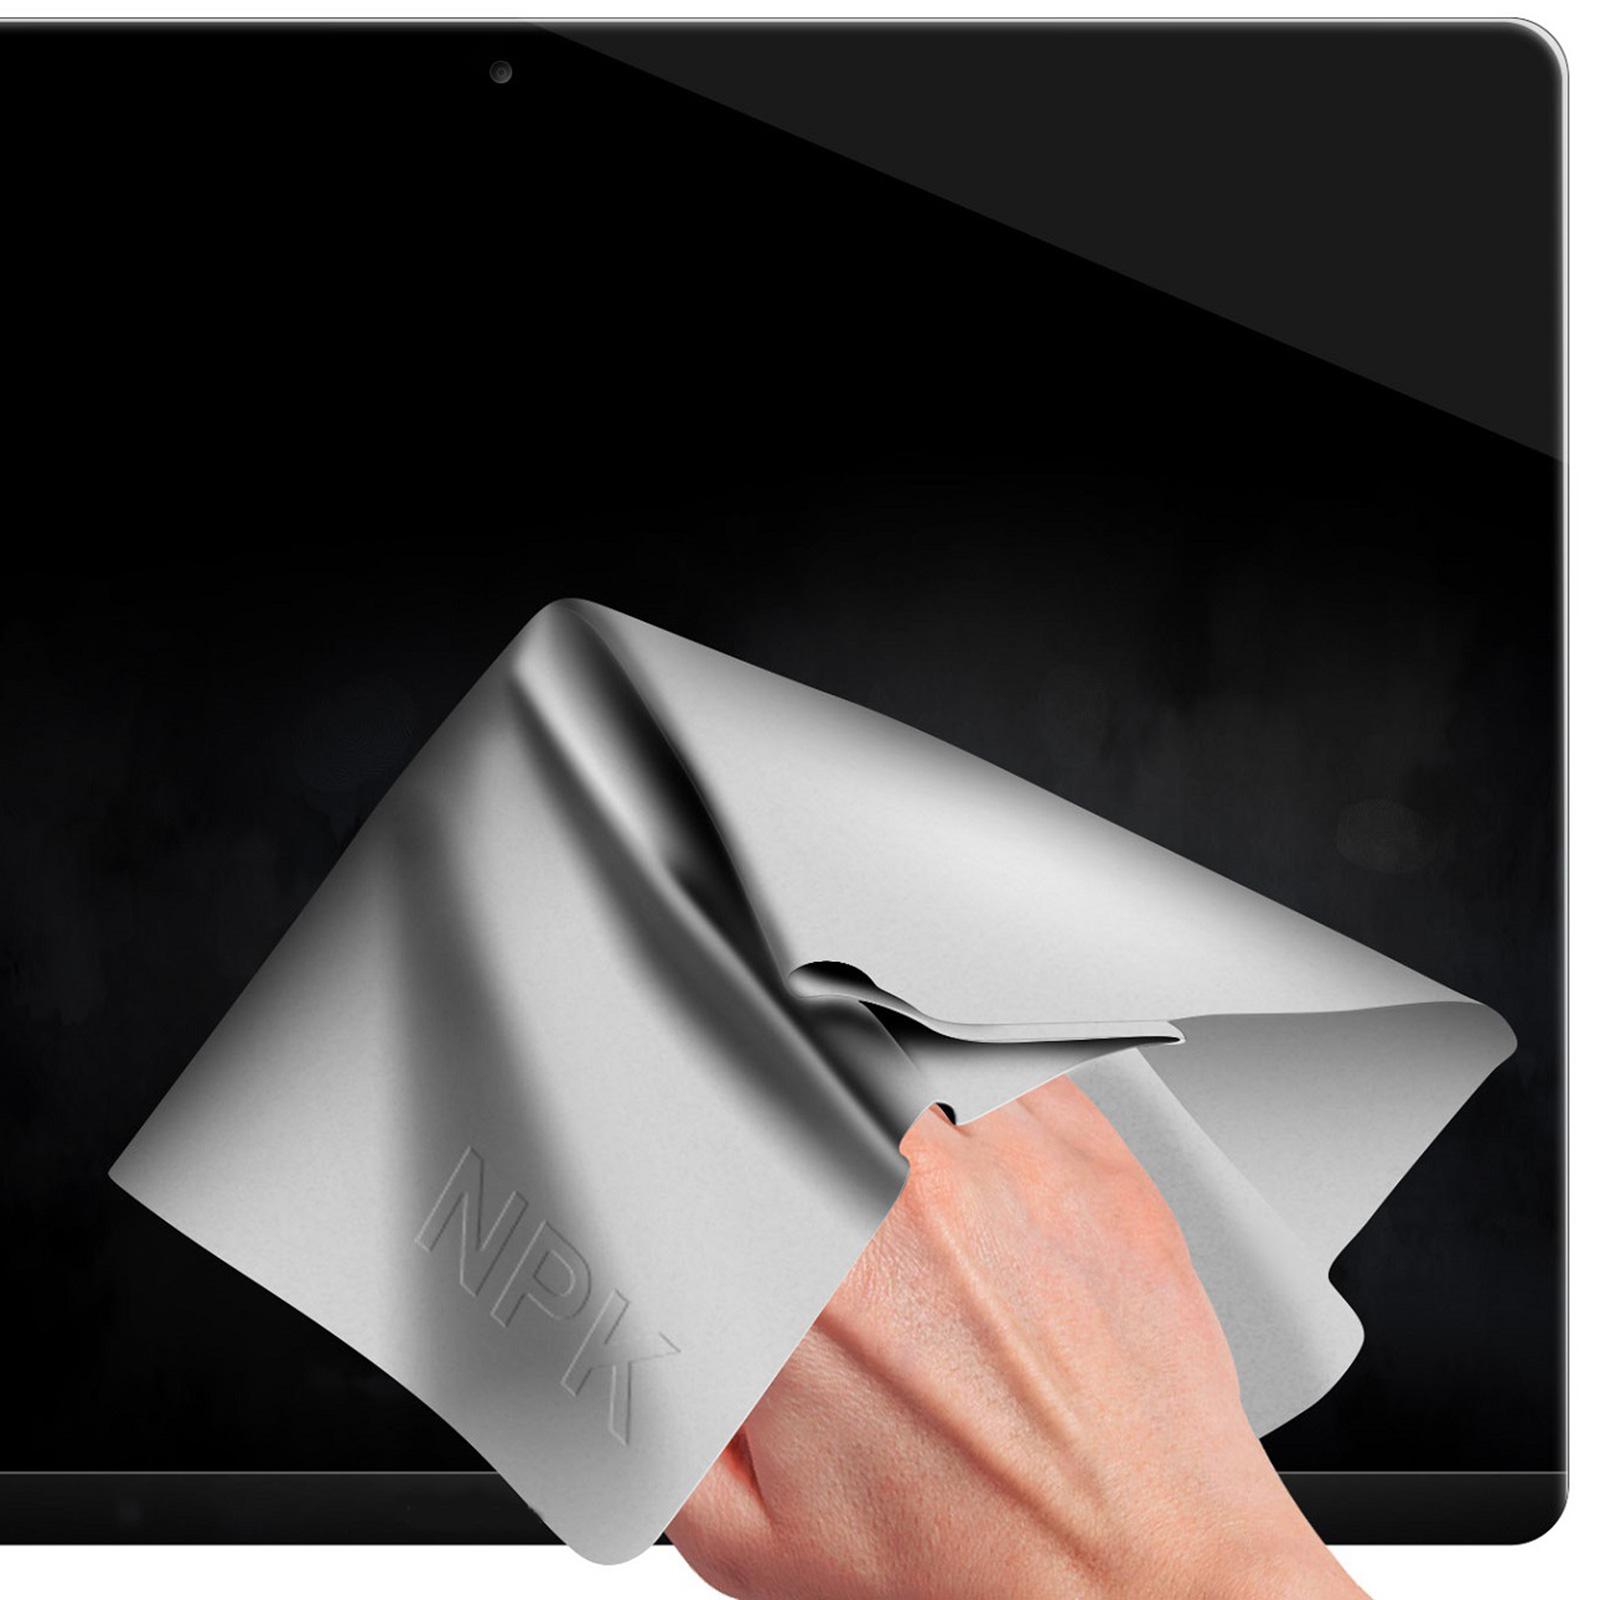 Microfiber Liner Cleaning Cloth Keyboard Cover Cloth Premium Dustproof Cover 34cmx22.5cm